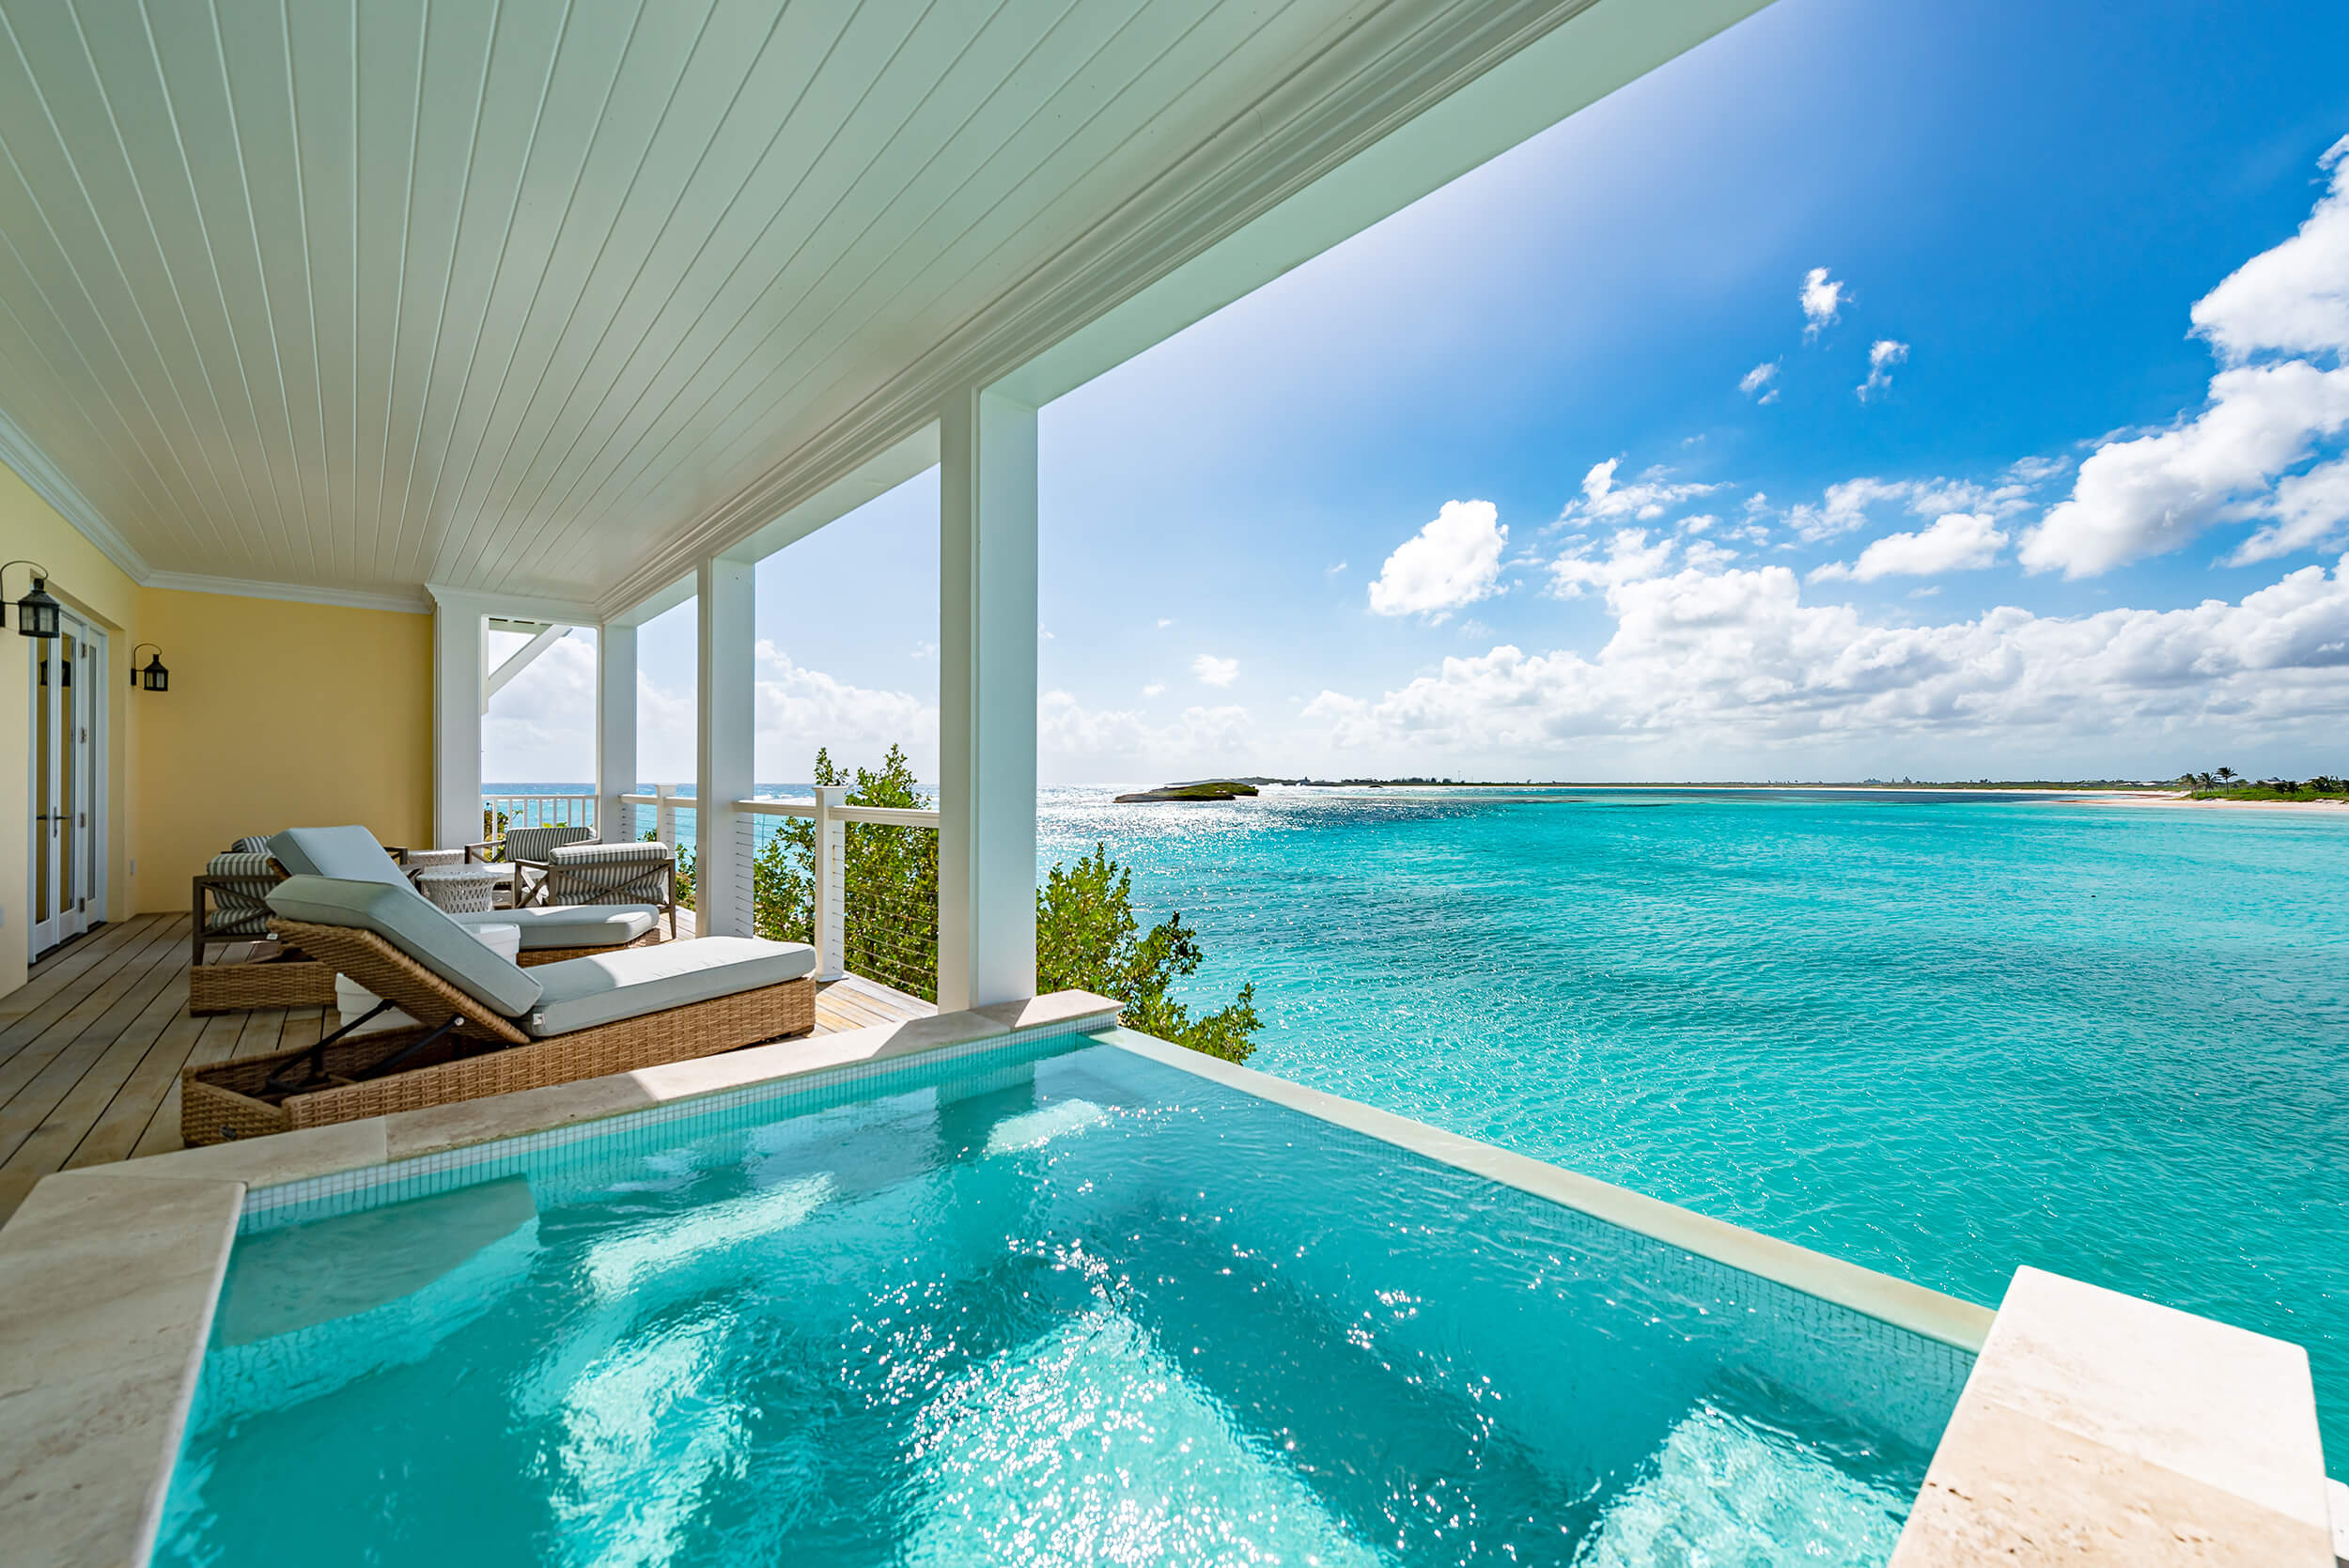 Scenic view of The Abaco Club's coastal homes, displaying the exclusive club lifestyle